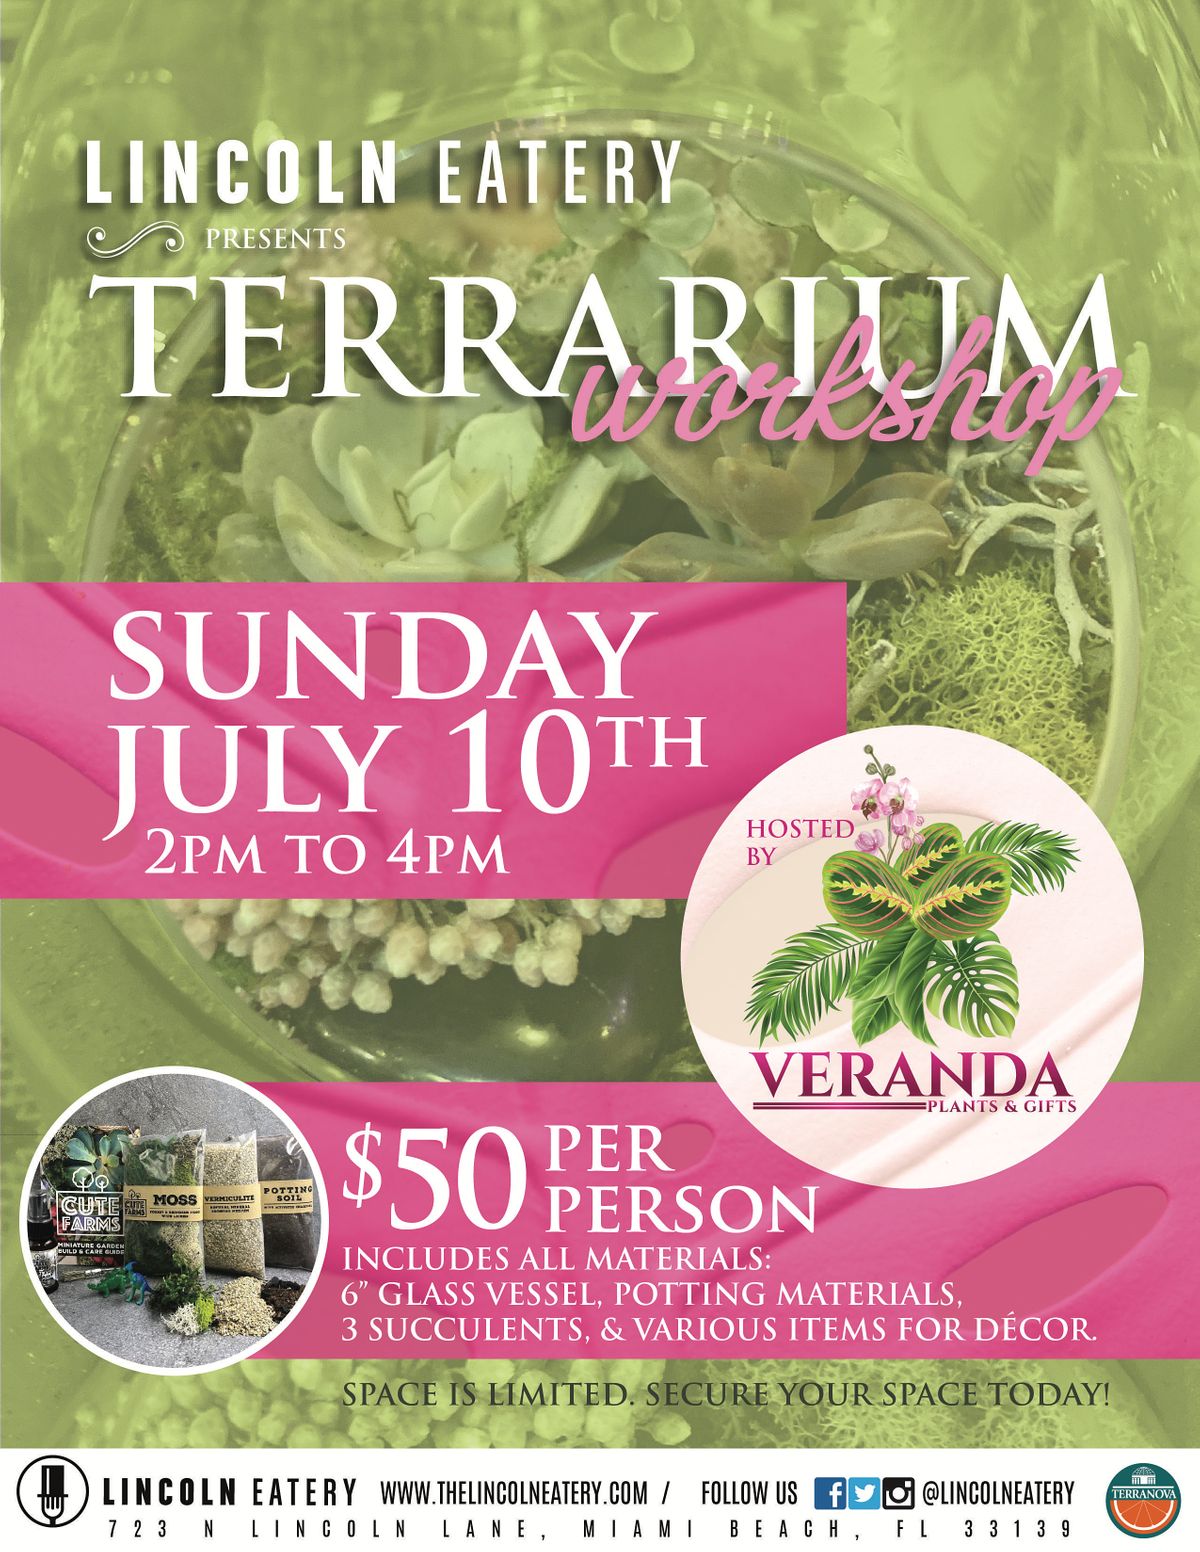 Terrarium Workshop at the Lincoln Eatery